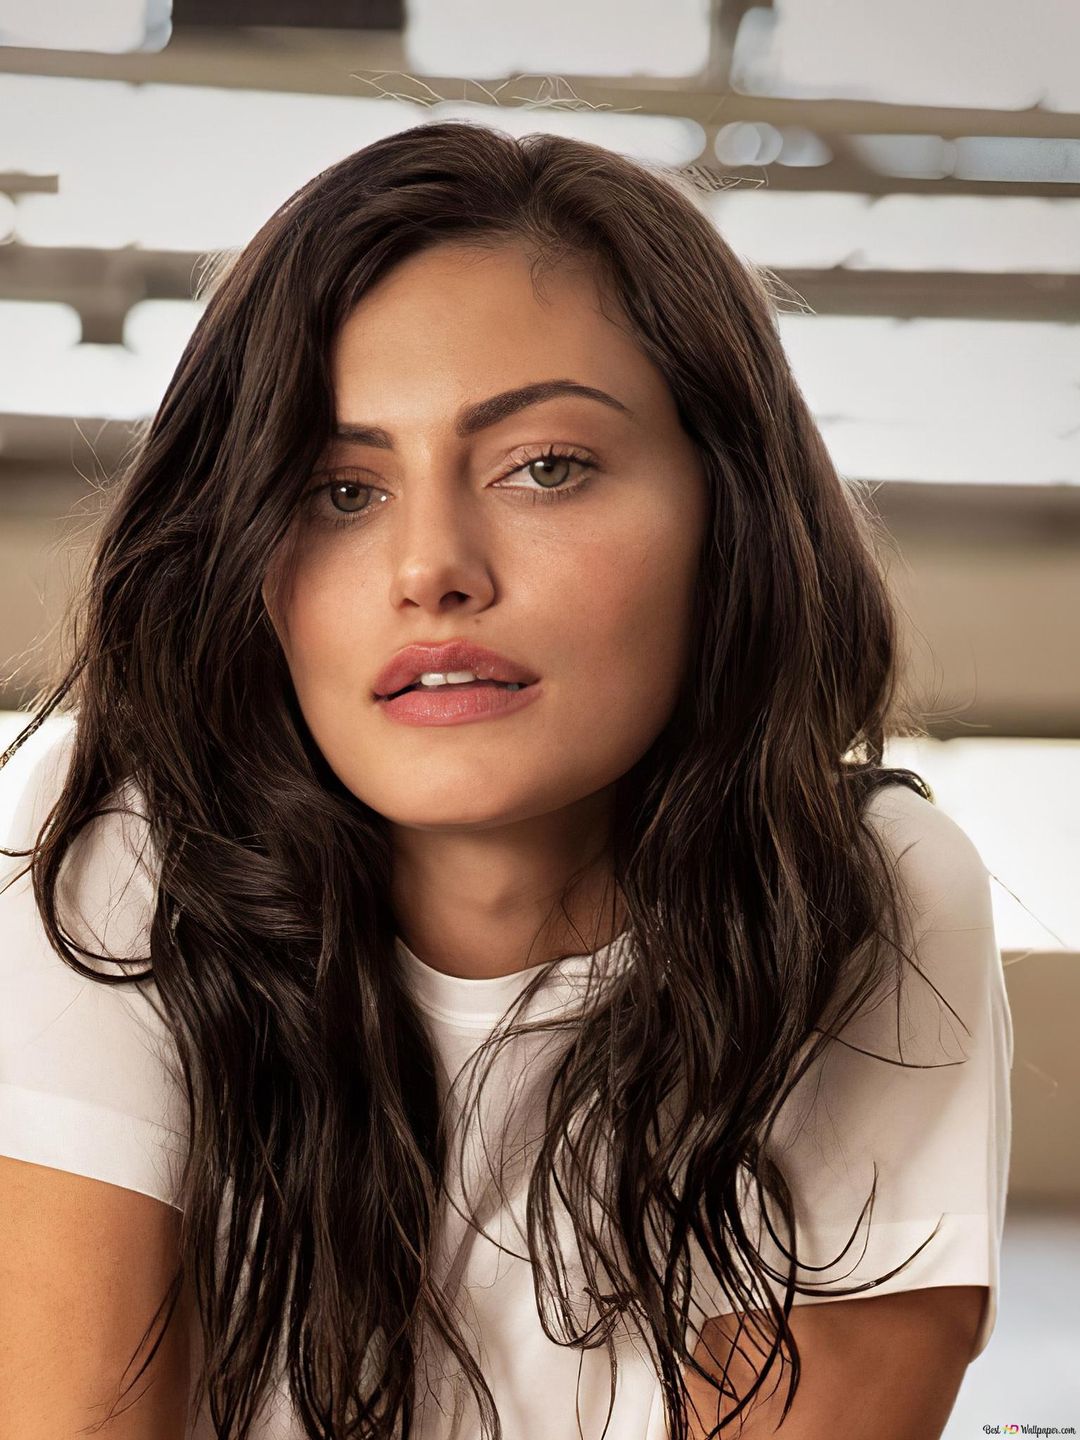 Phoebe Tonkin how old is she